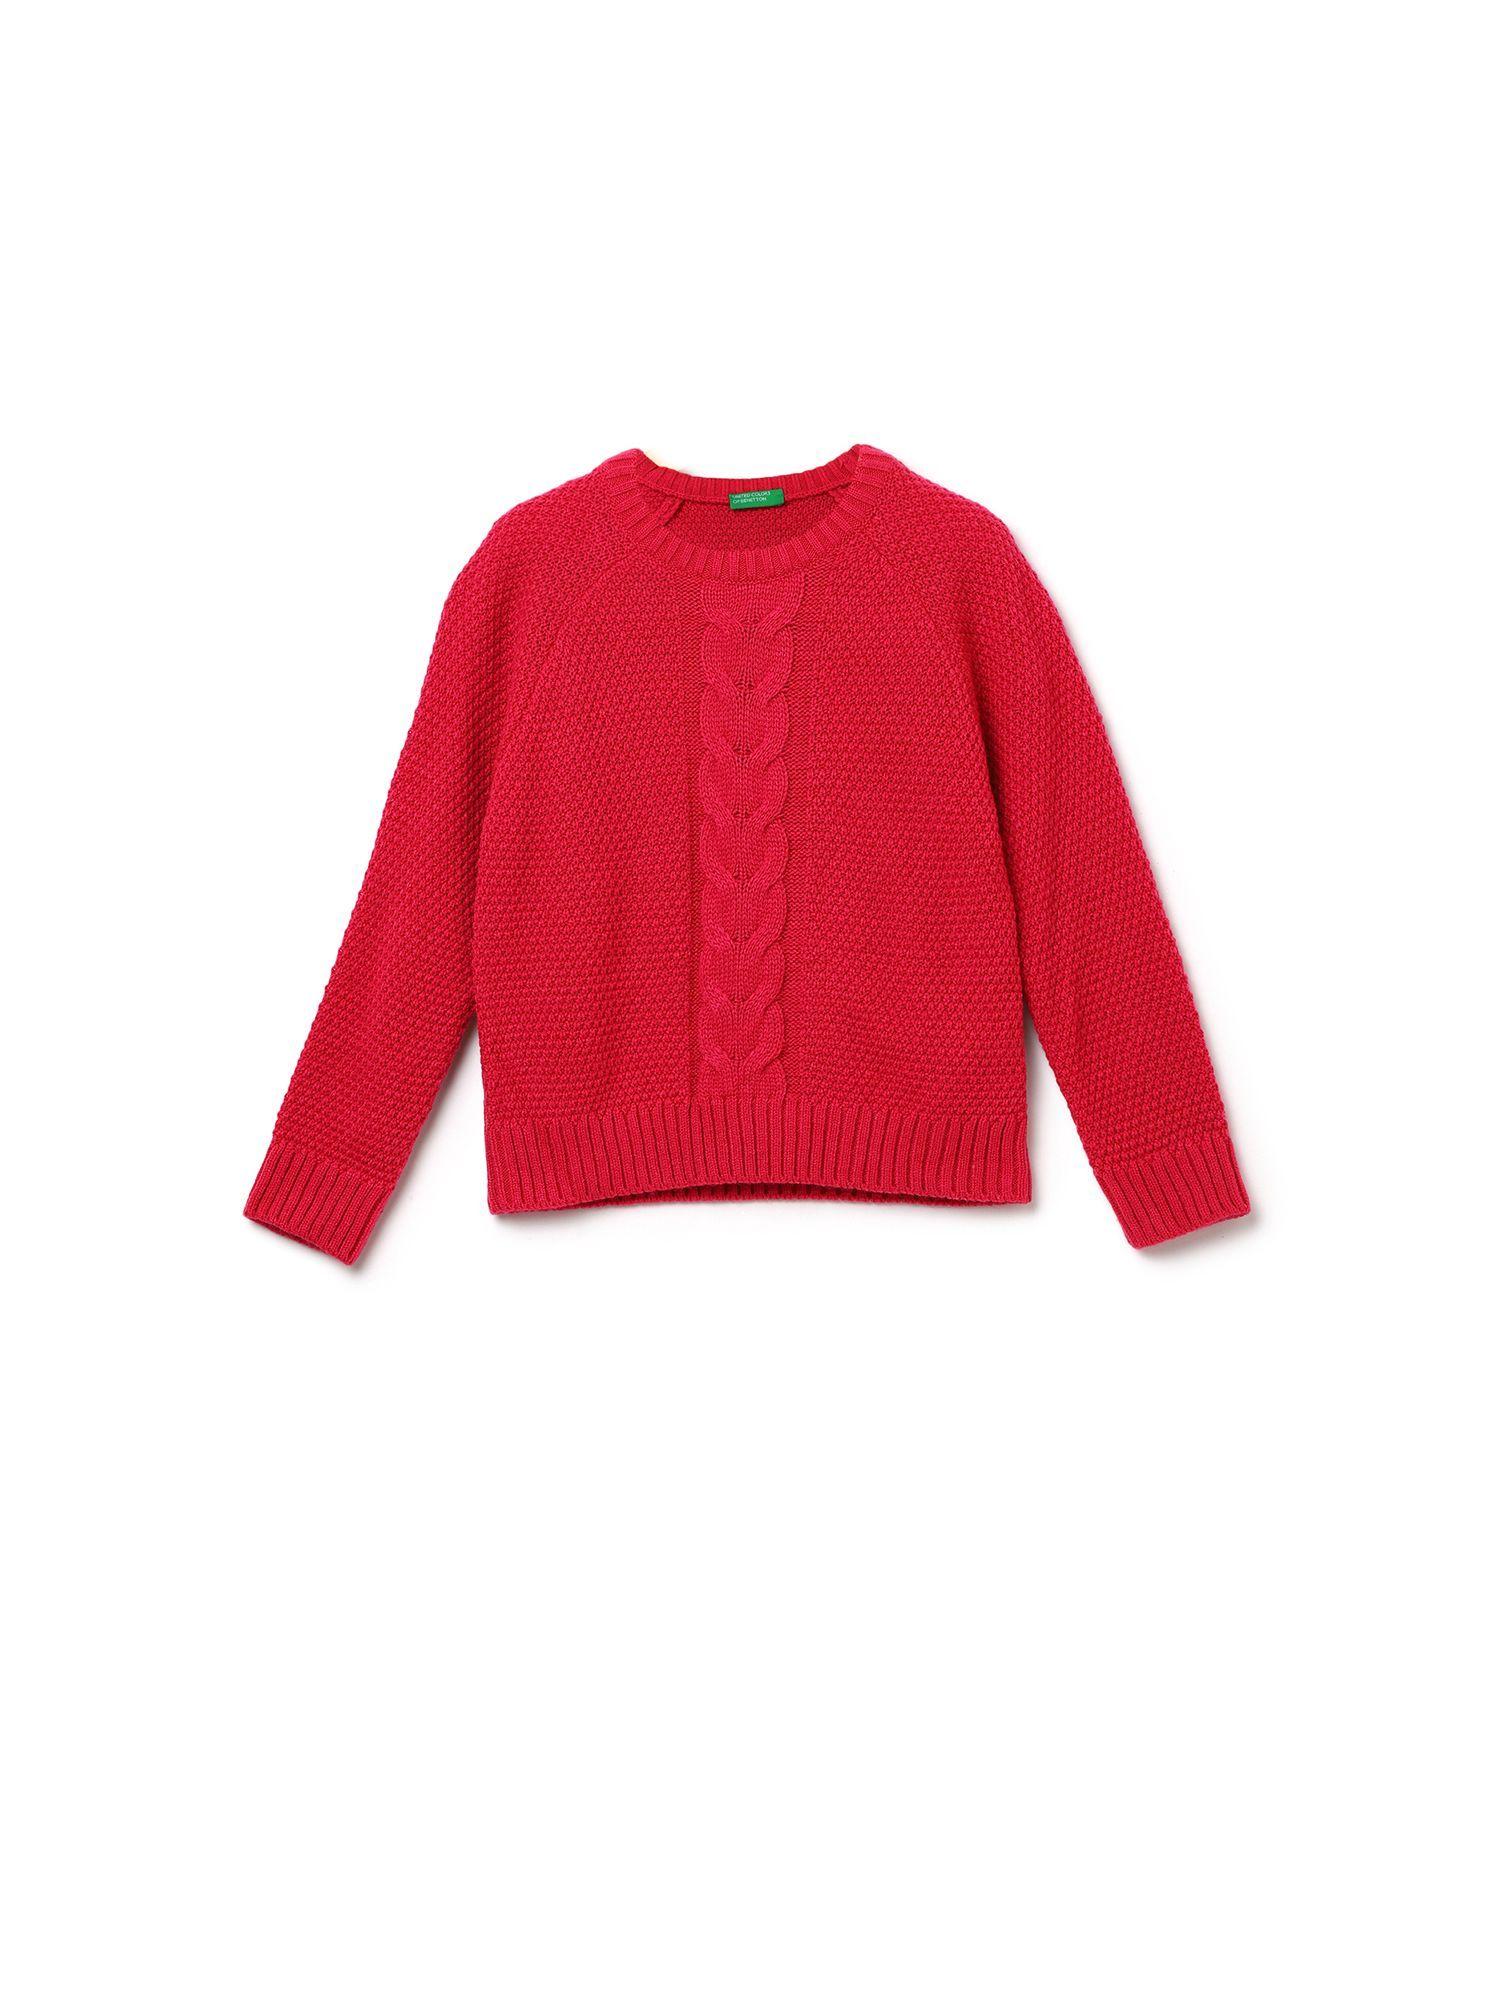 girls red knitted round neck sweater